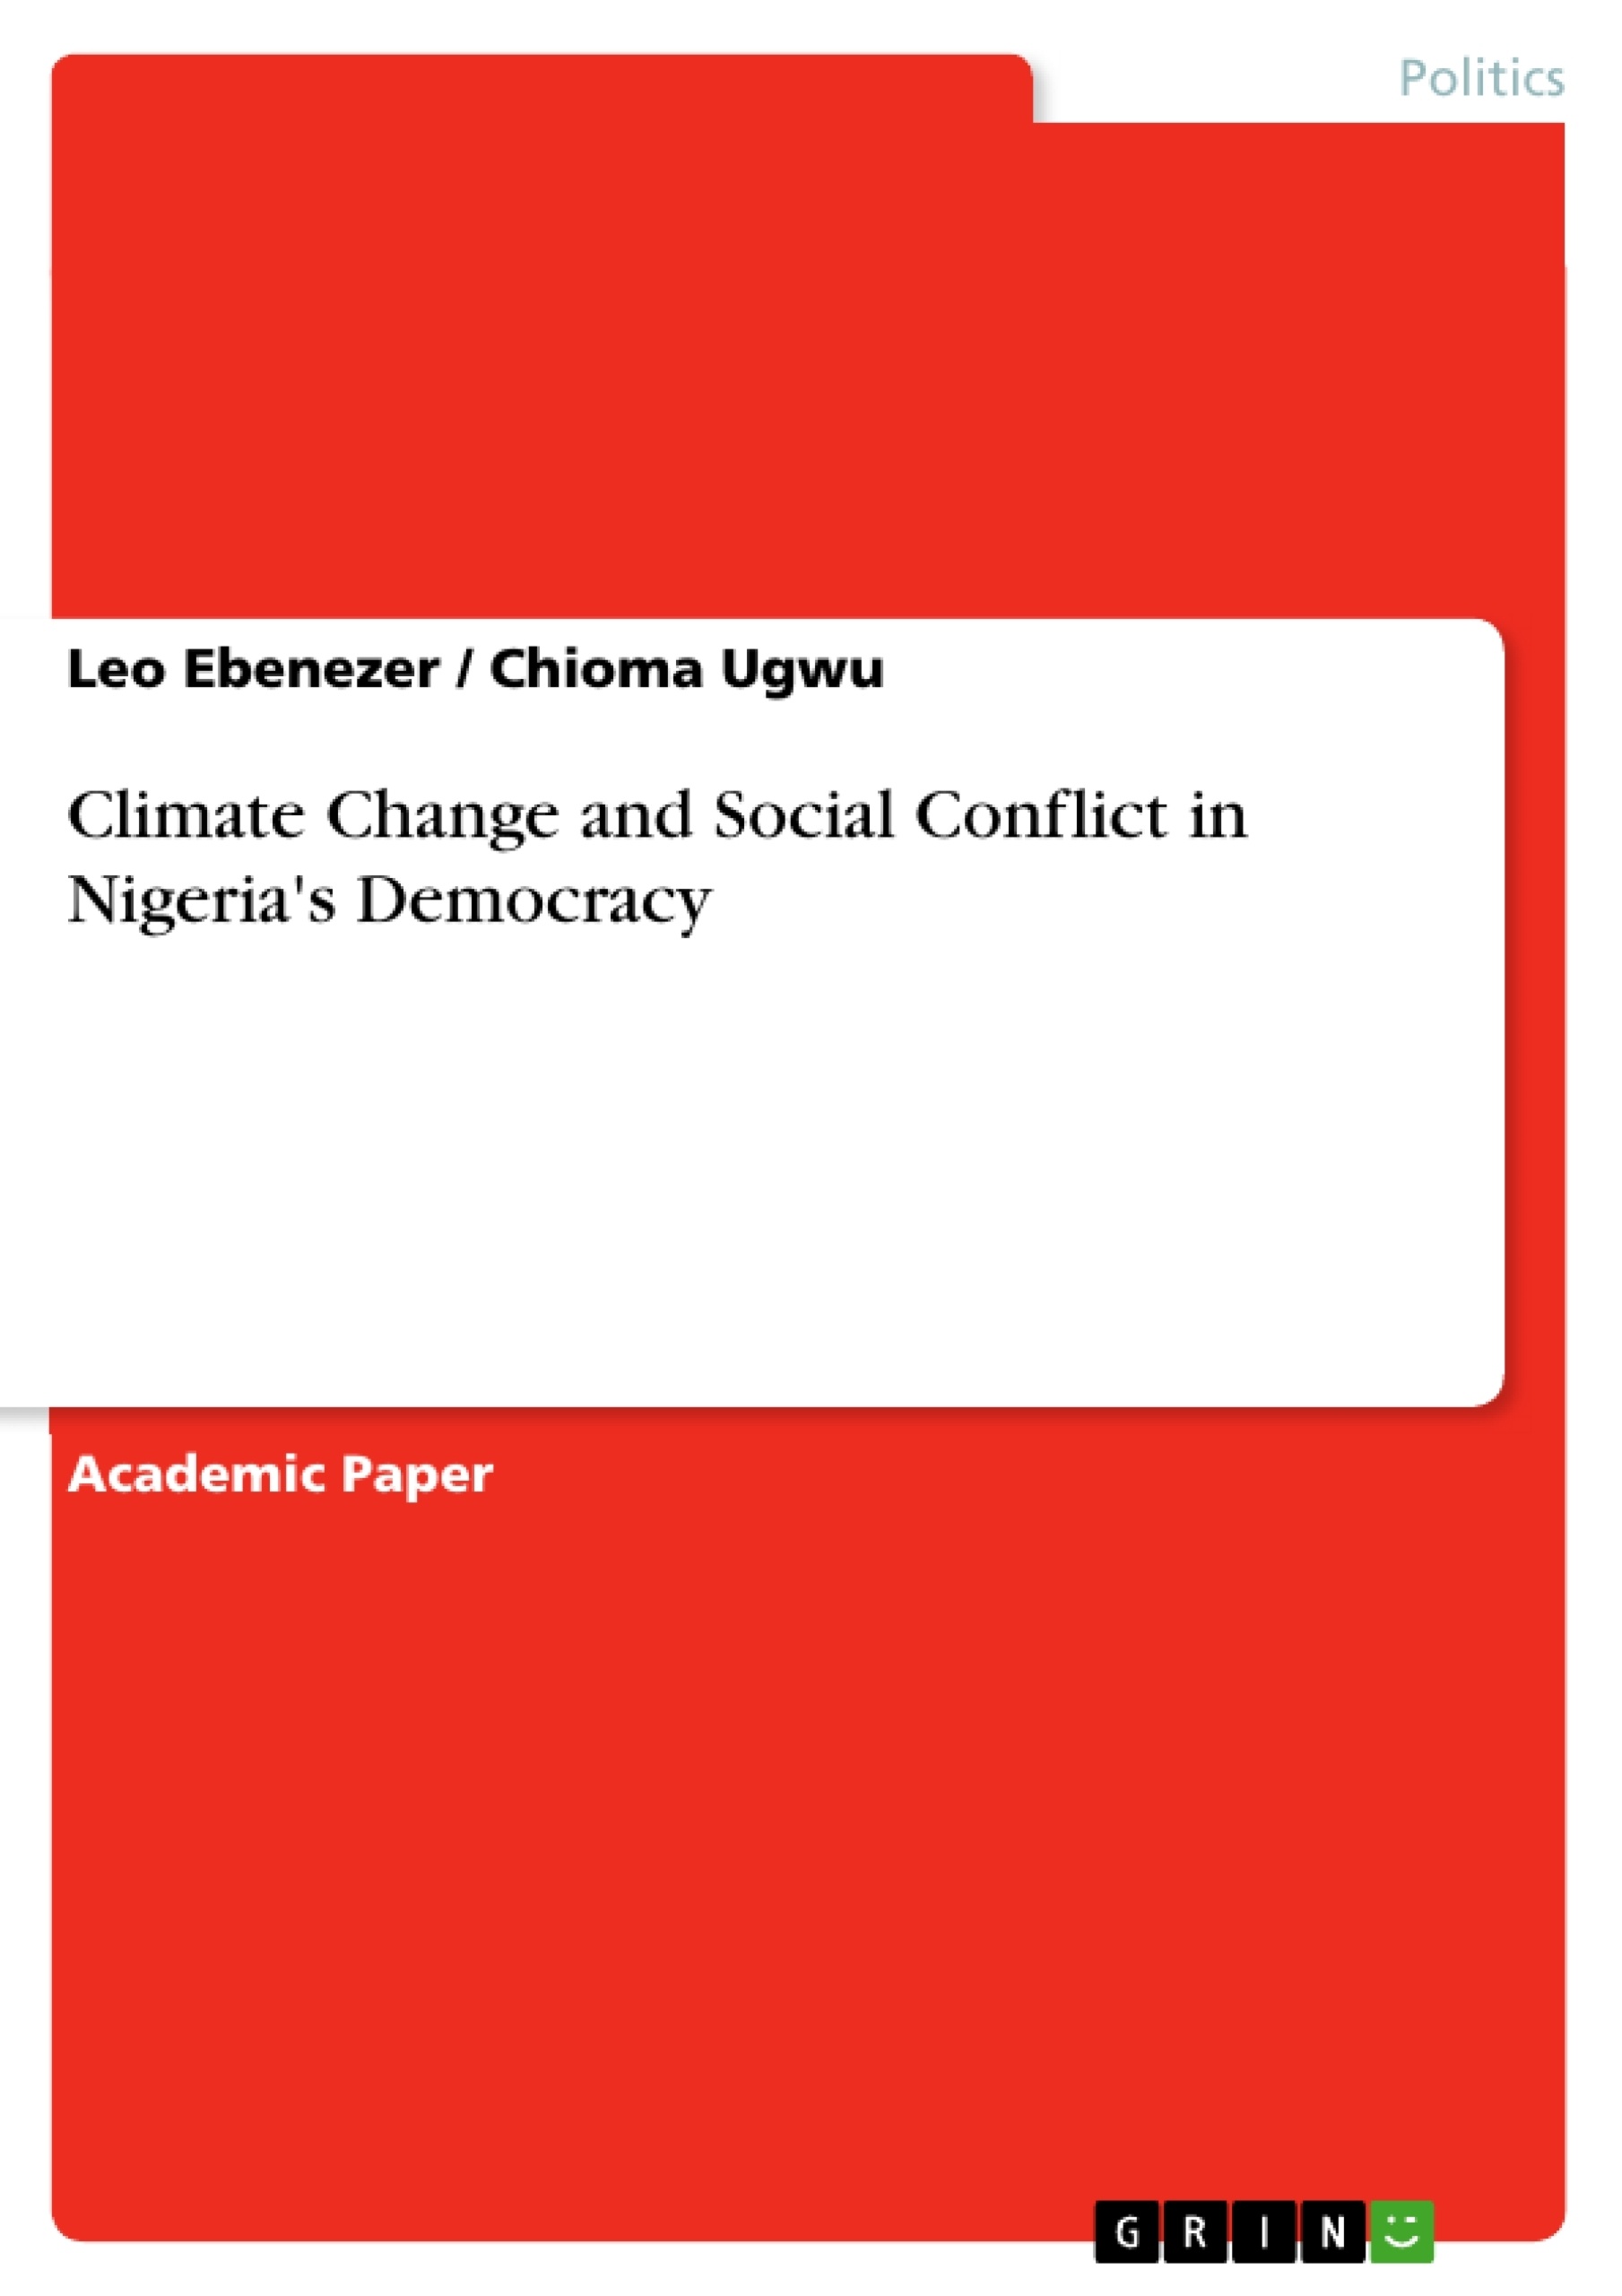 Title: Climate Change and Social Conflict in Nigeria's Democracy